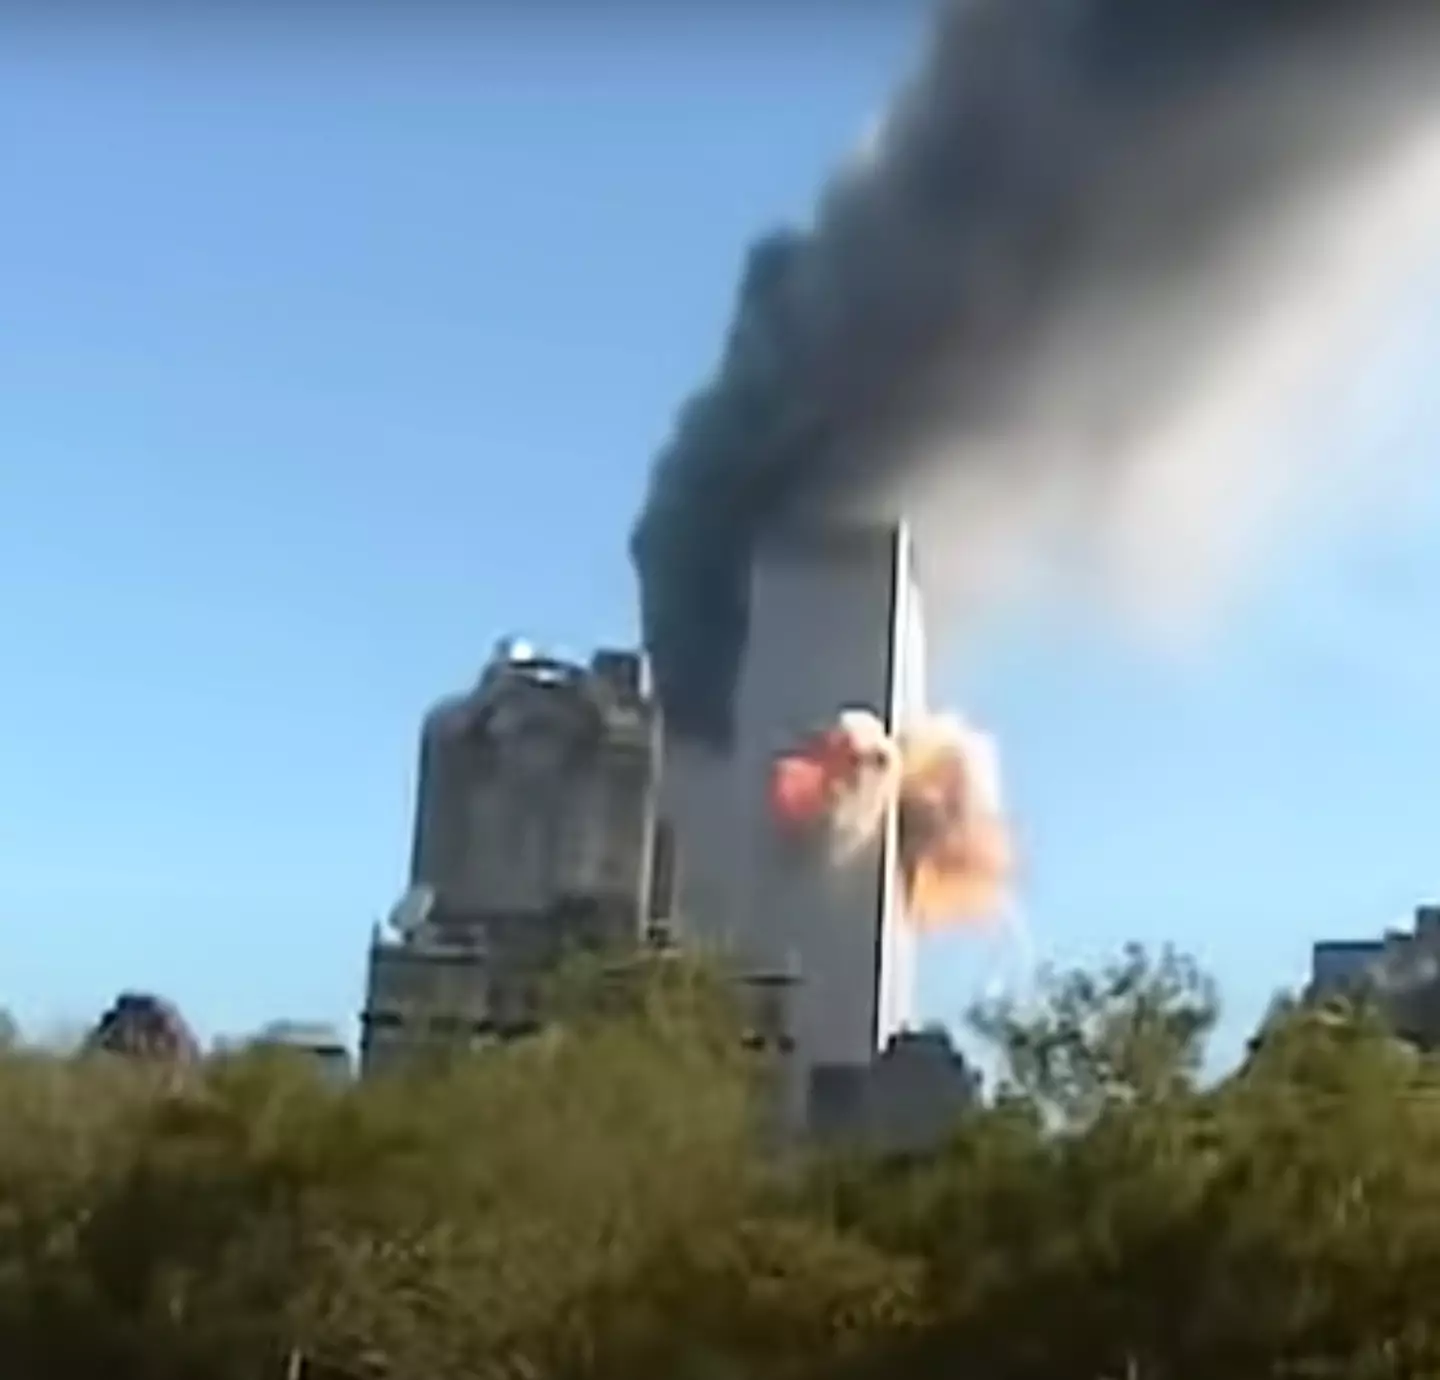 New footage of 9/11 was released 20 years after the attack.